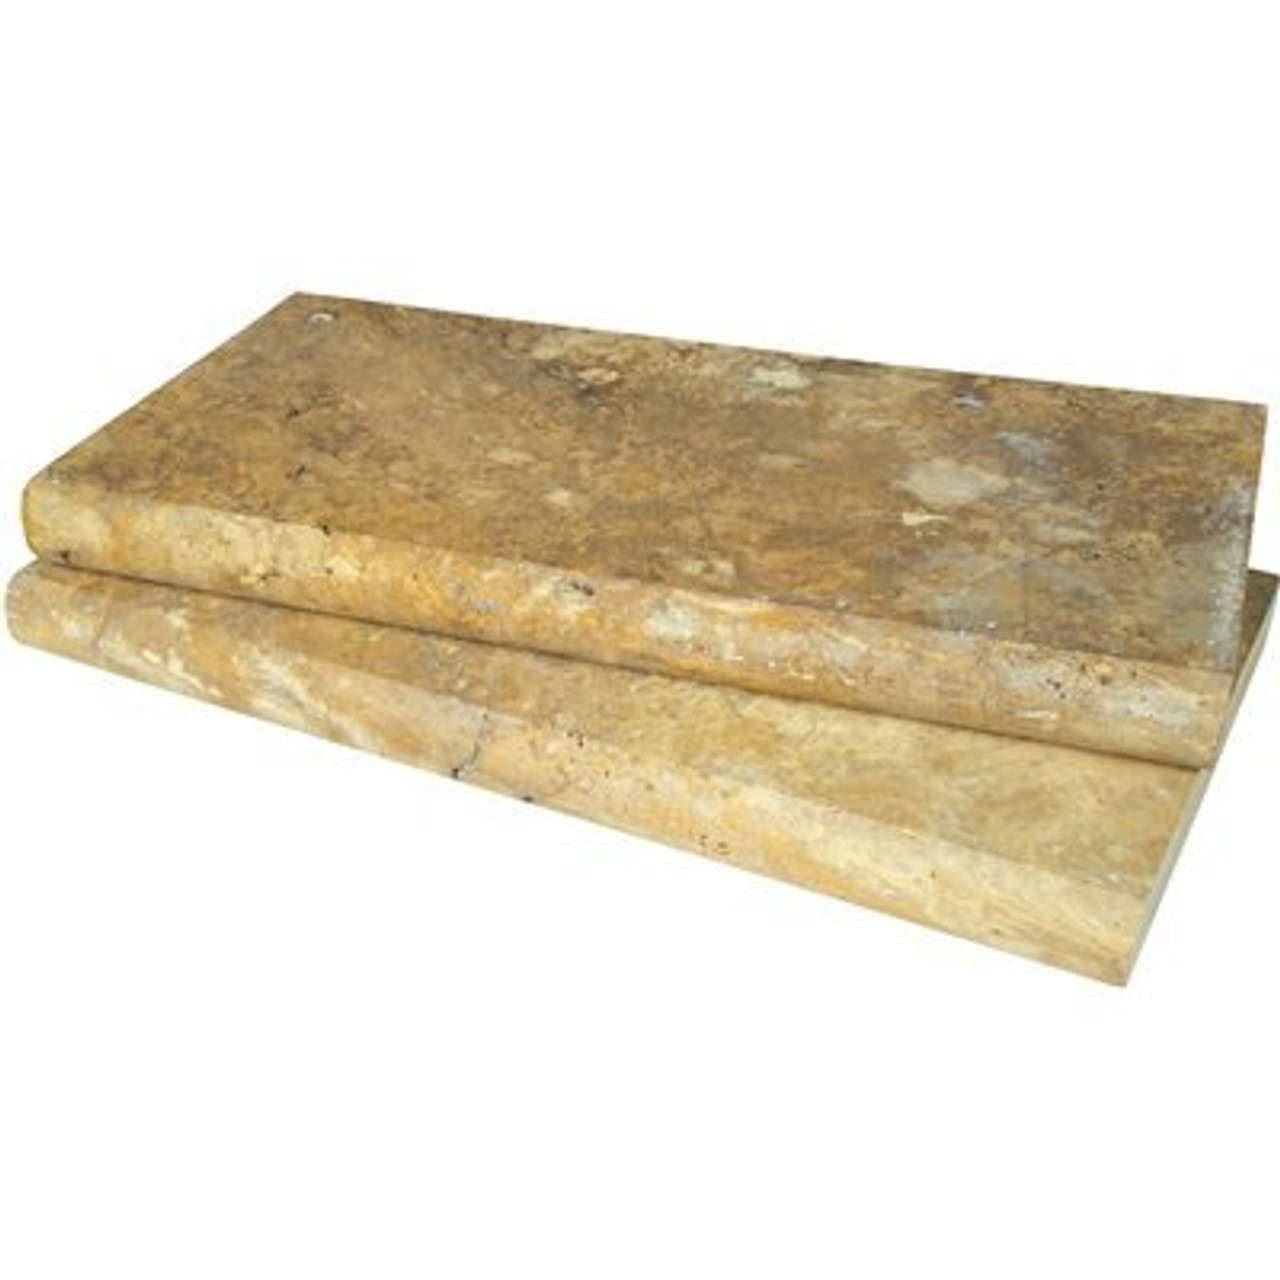 Msi Riviera Gold 2 In. X 12 In. X 24 In. Travertine Pool Coping (15 Pieces/30 Sq. Ft./Pallet)